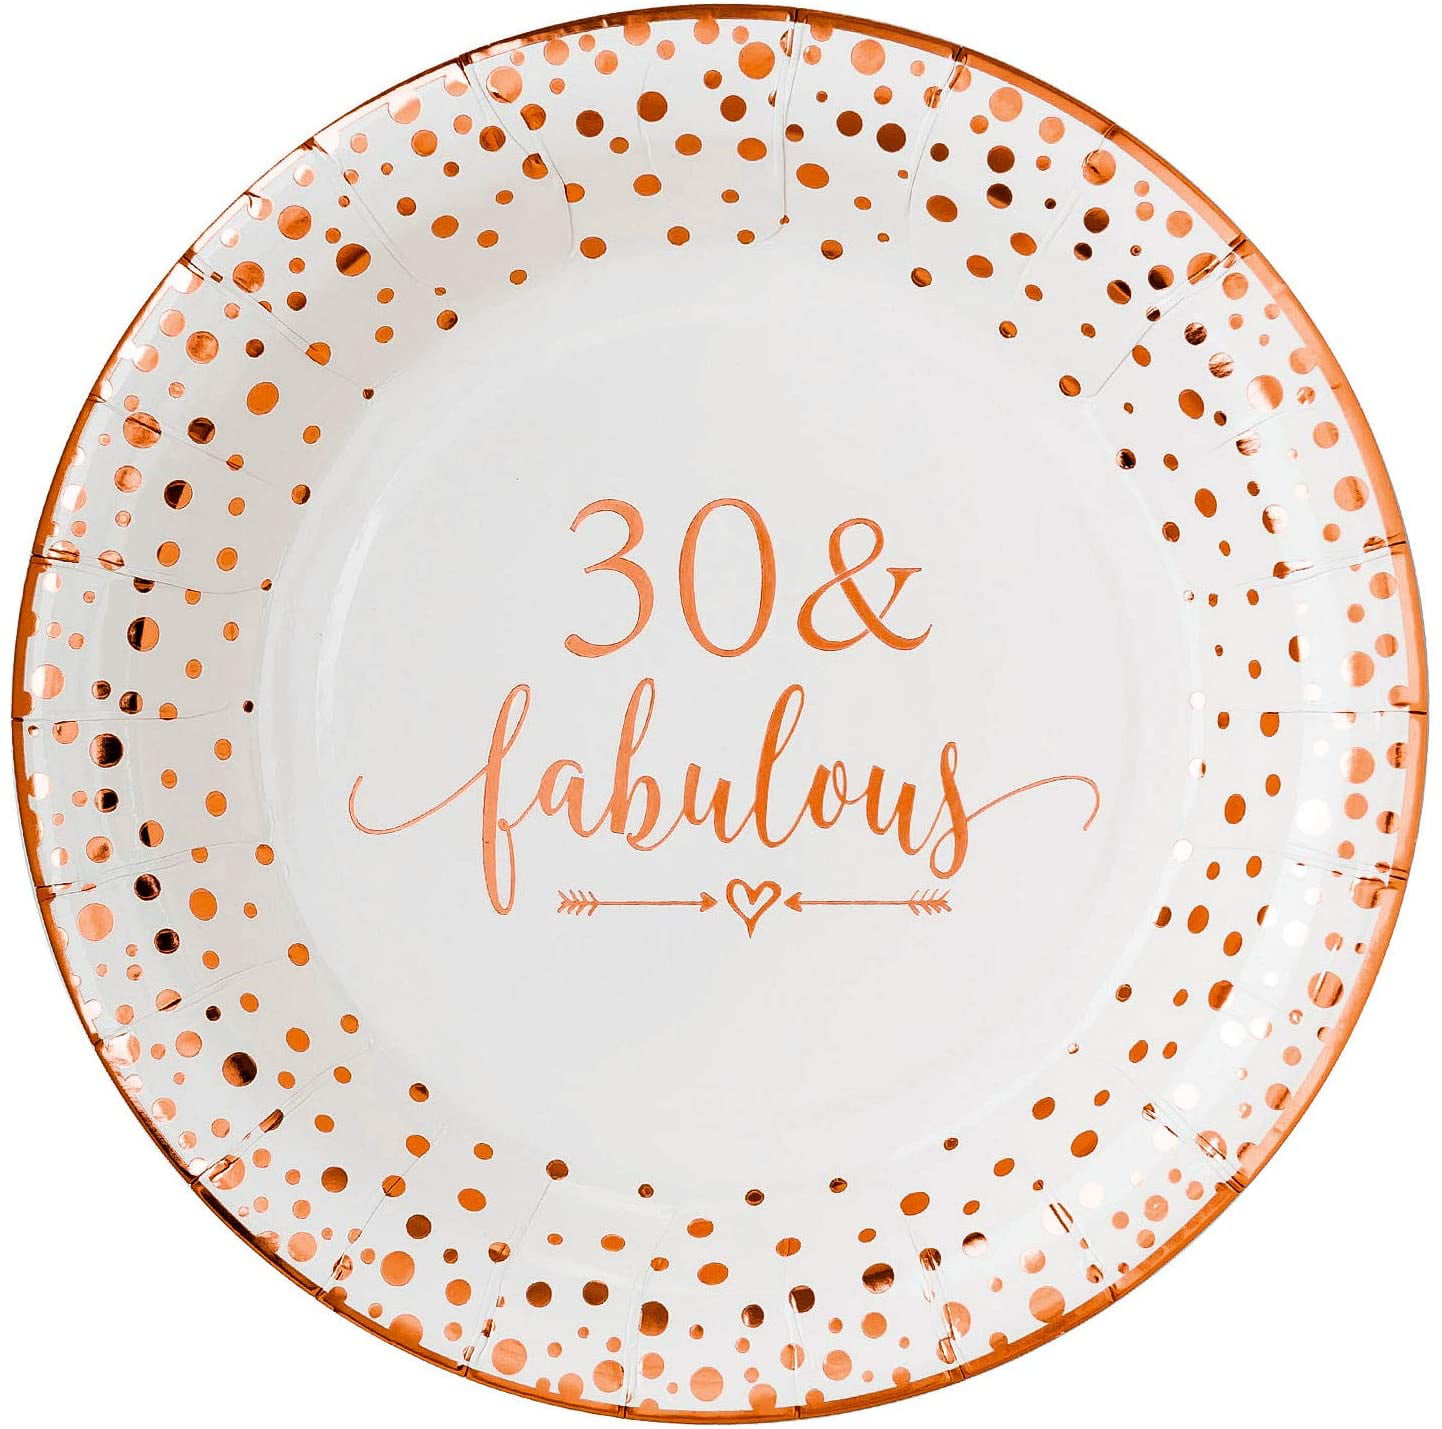 50 Count Forty 9 Plate Buffet Lunch Cake Crisky 40th Birthday Plates Black and Gold Dessert Dinner Plates for 40th Birthday Decorations Party Supplies Happy 40th Birthday